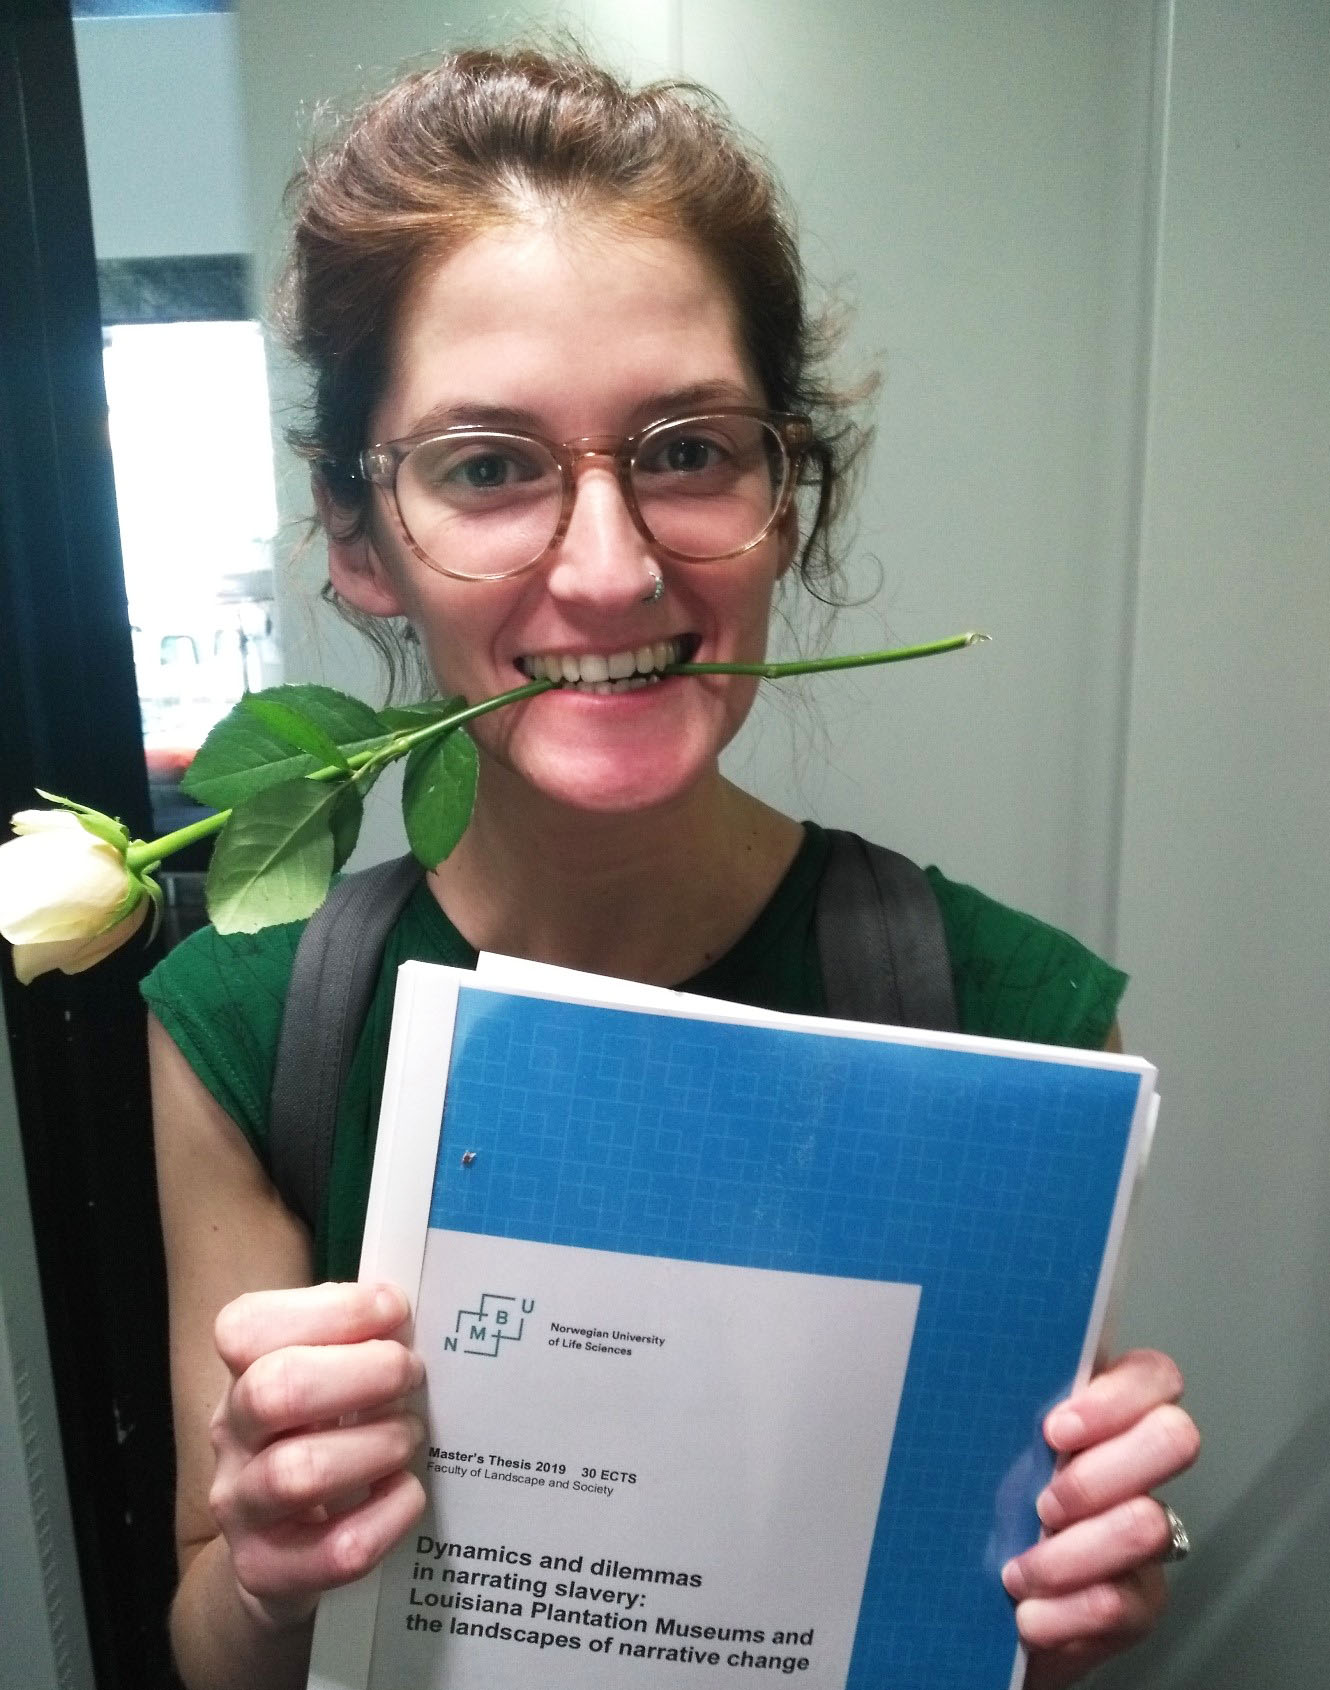 Handing in my thesis!